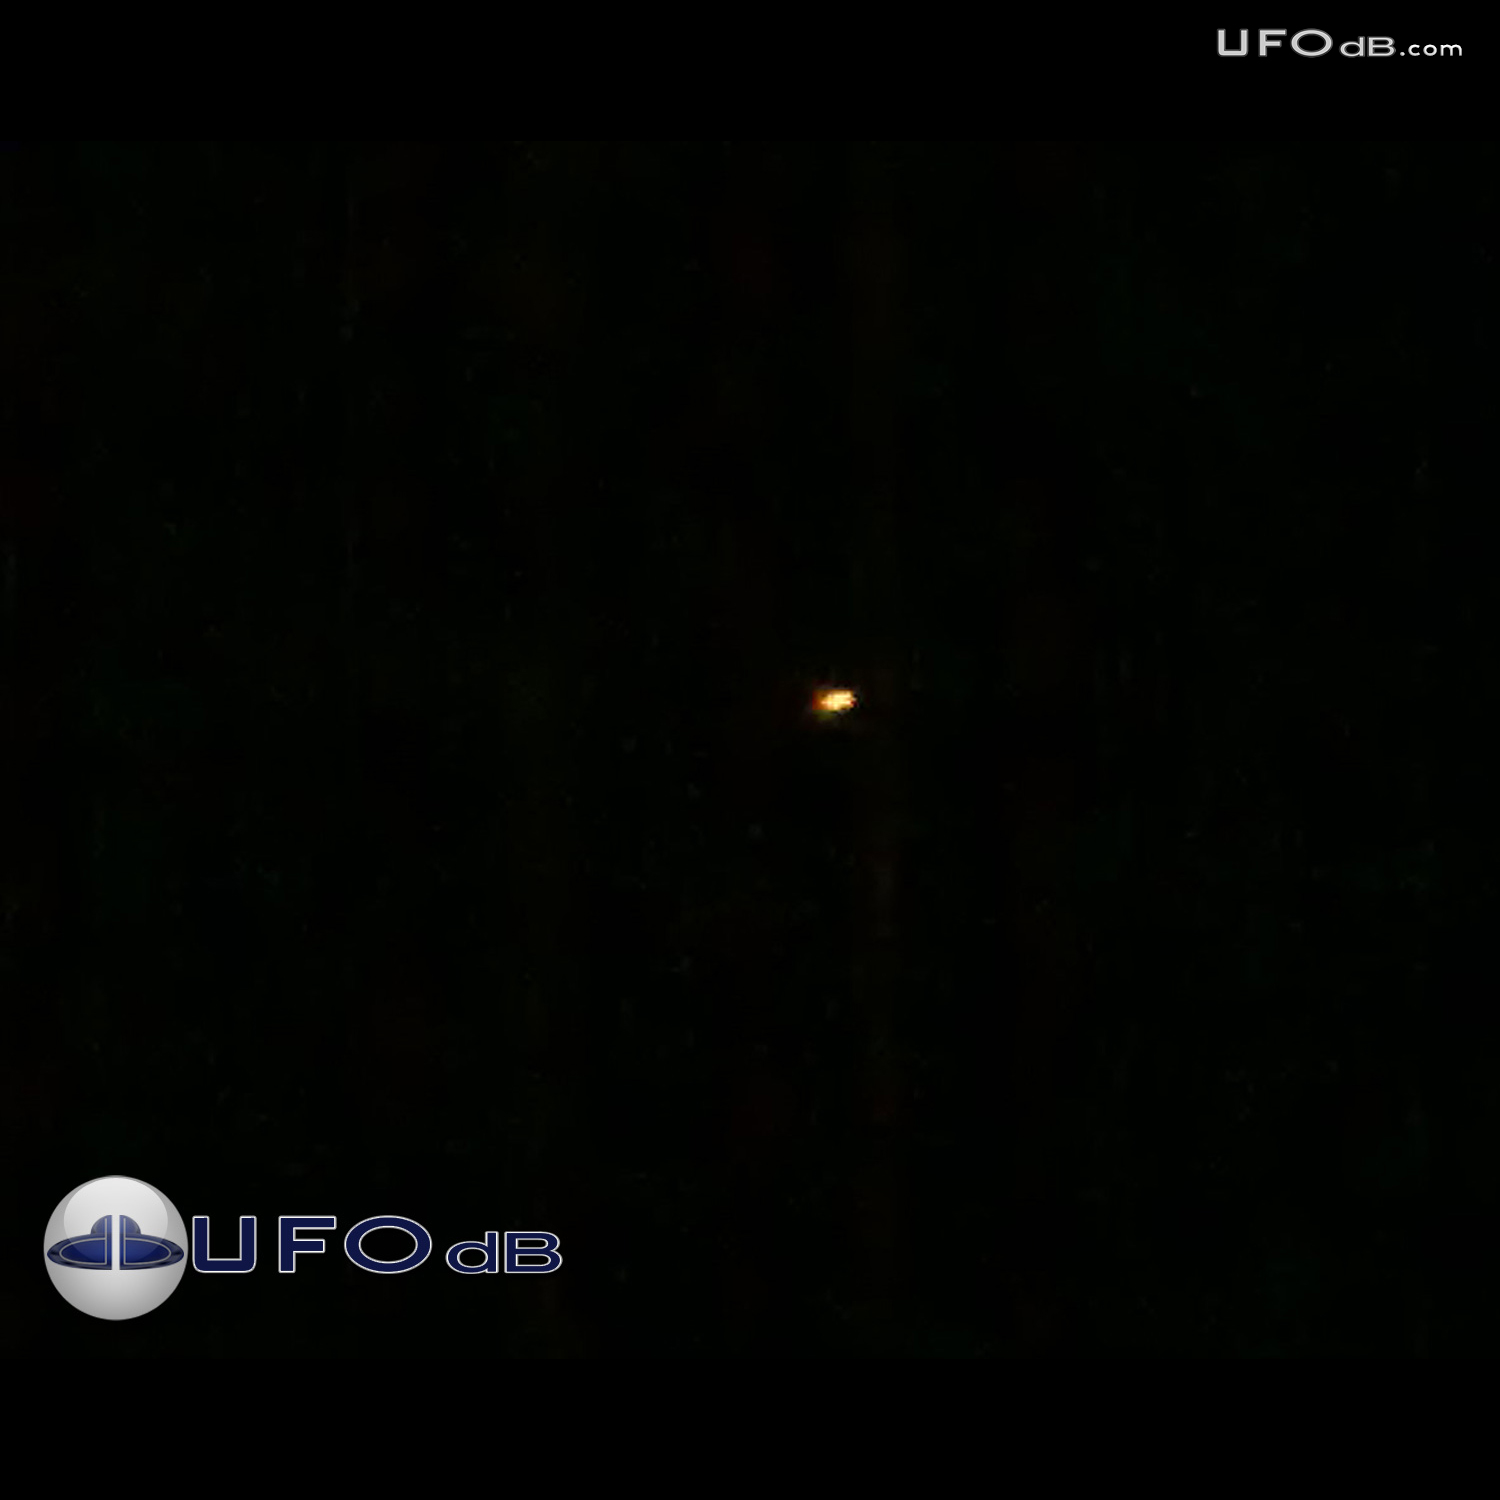 Too slow to be an airplane - UFO picture - South Africa January 1 2011 UFO Picture #278-1